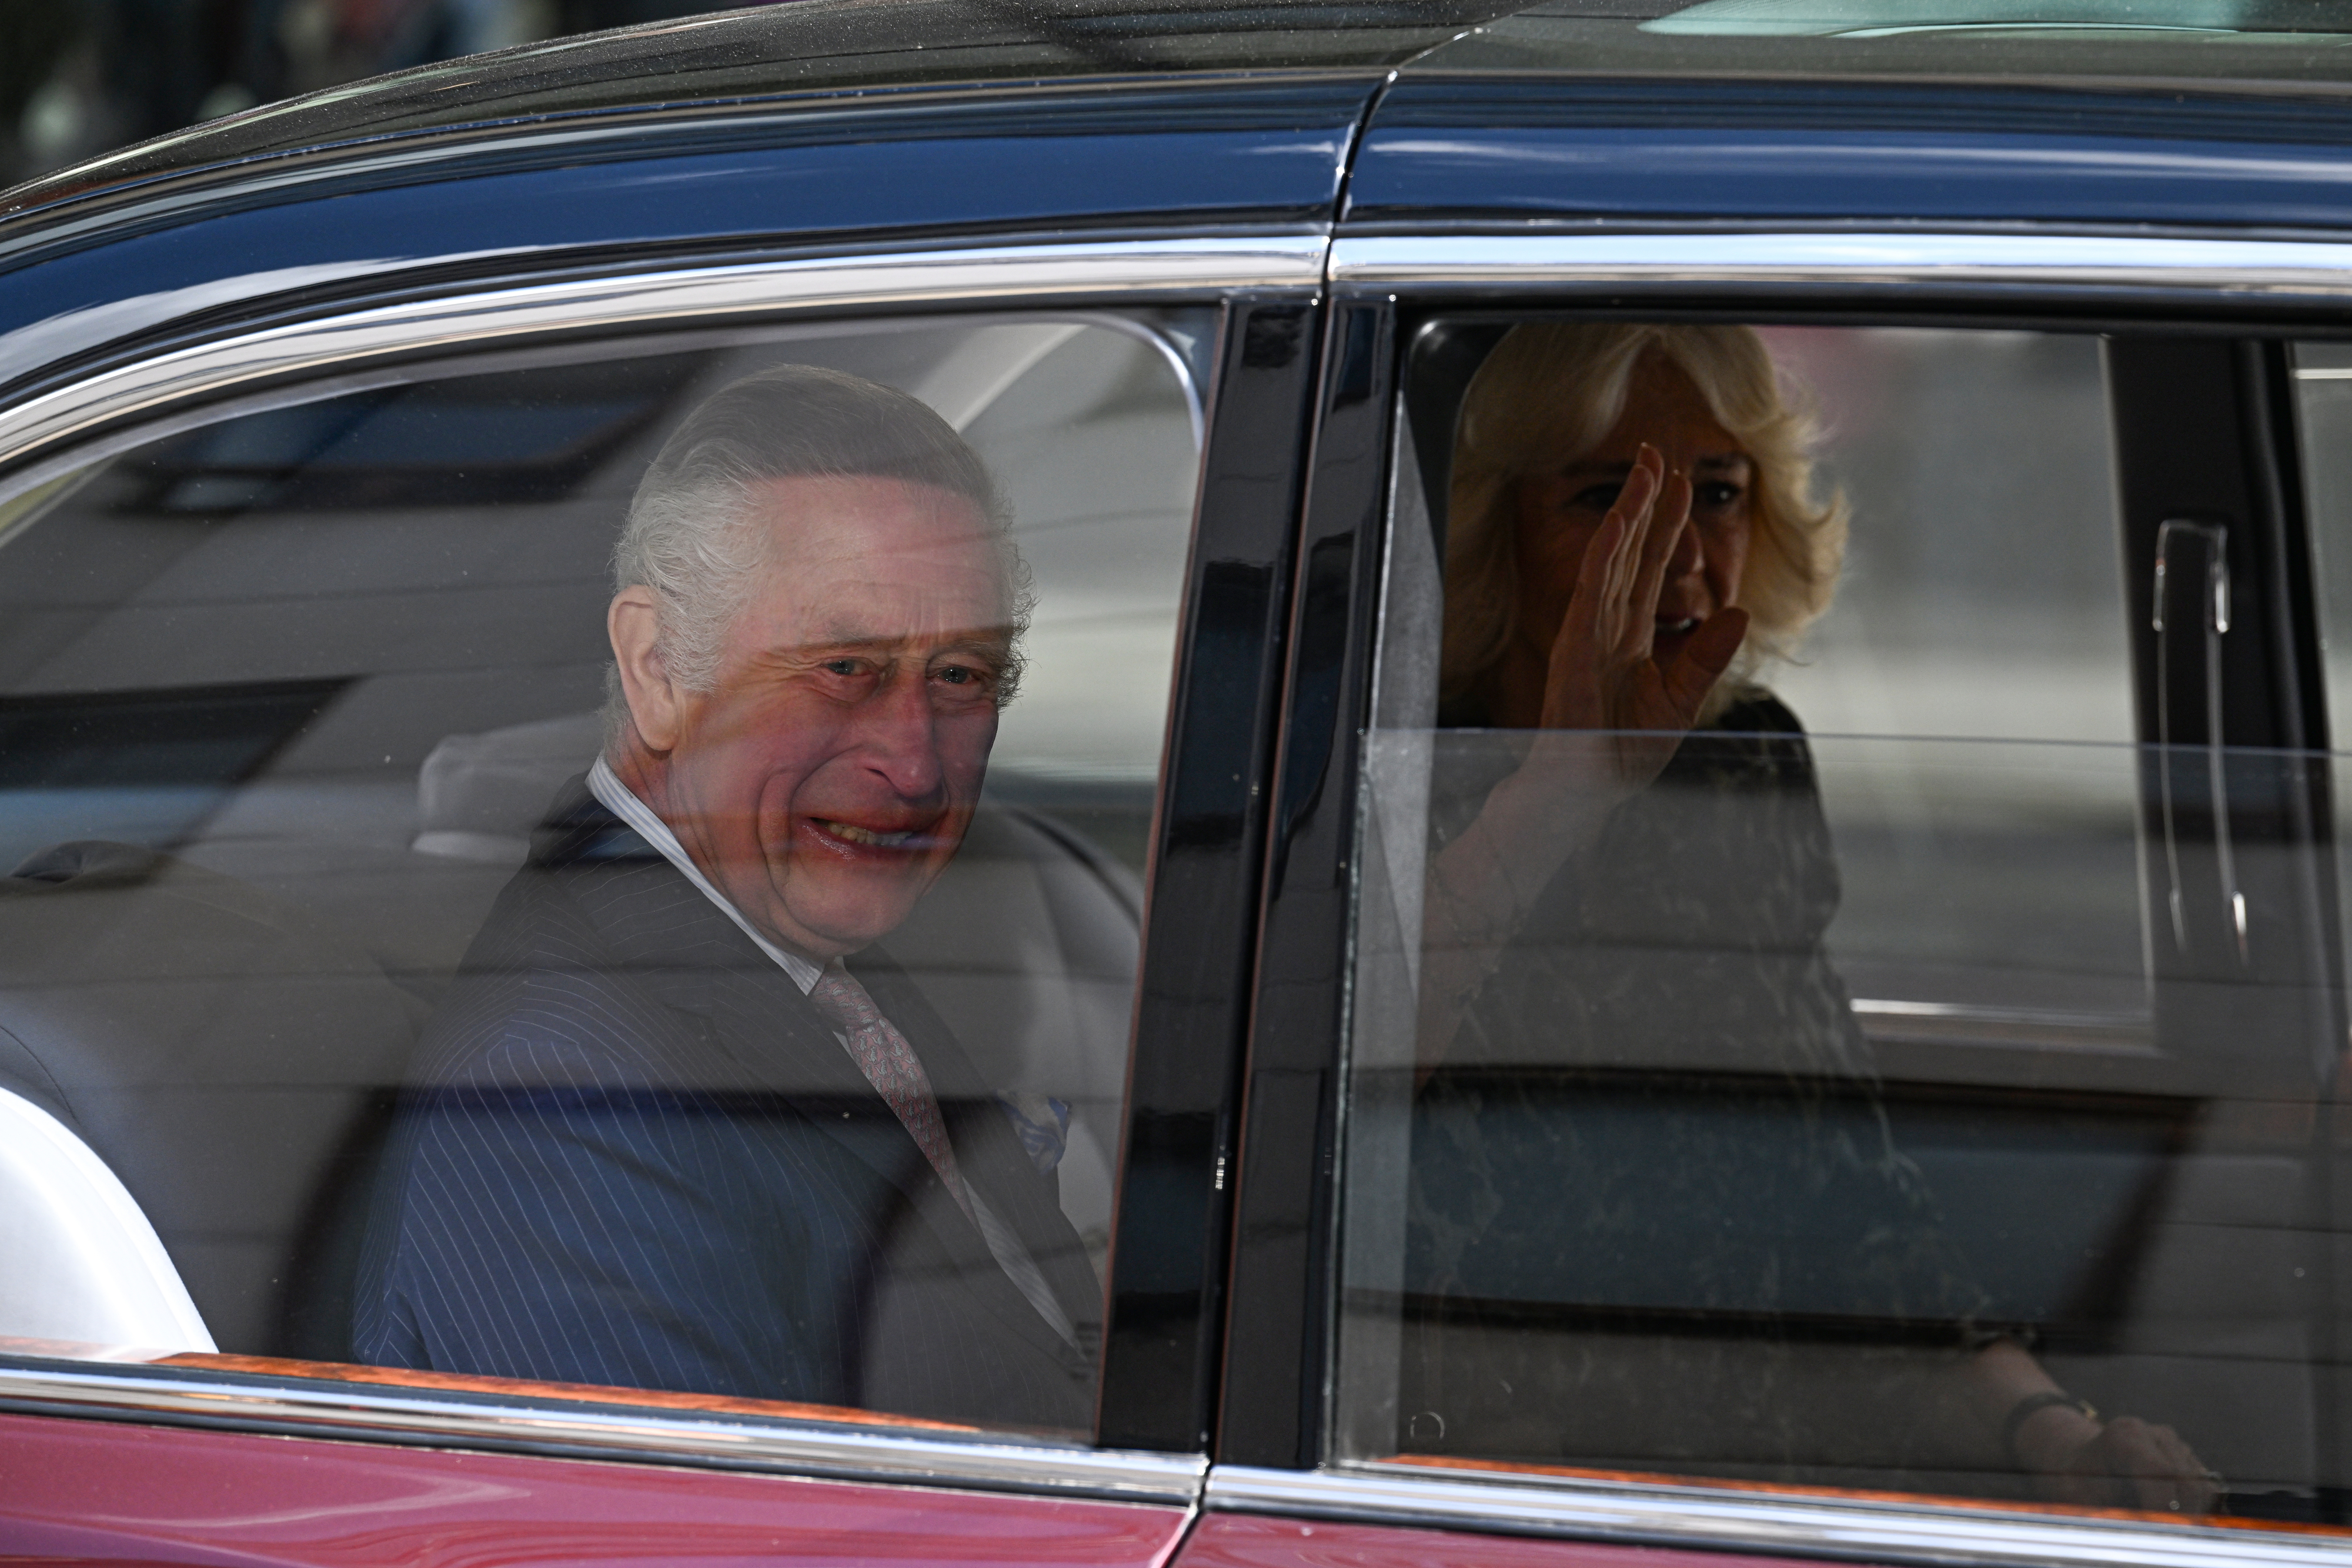 Two individuals smiling inside a car, visible through the window